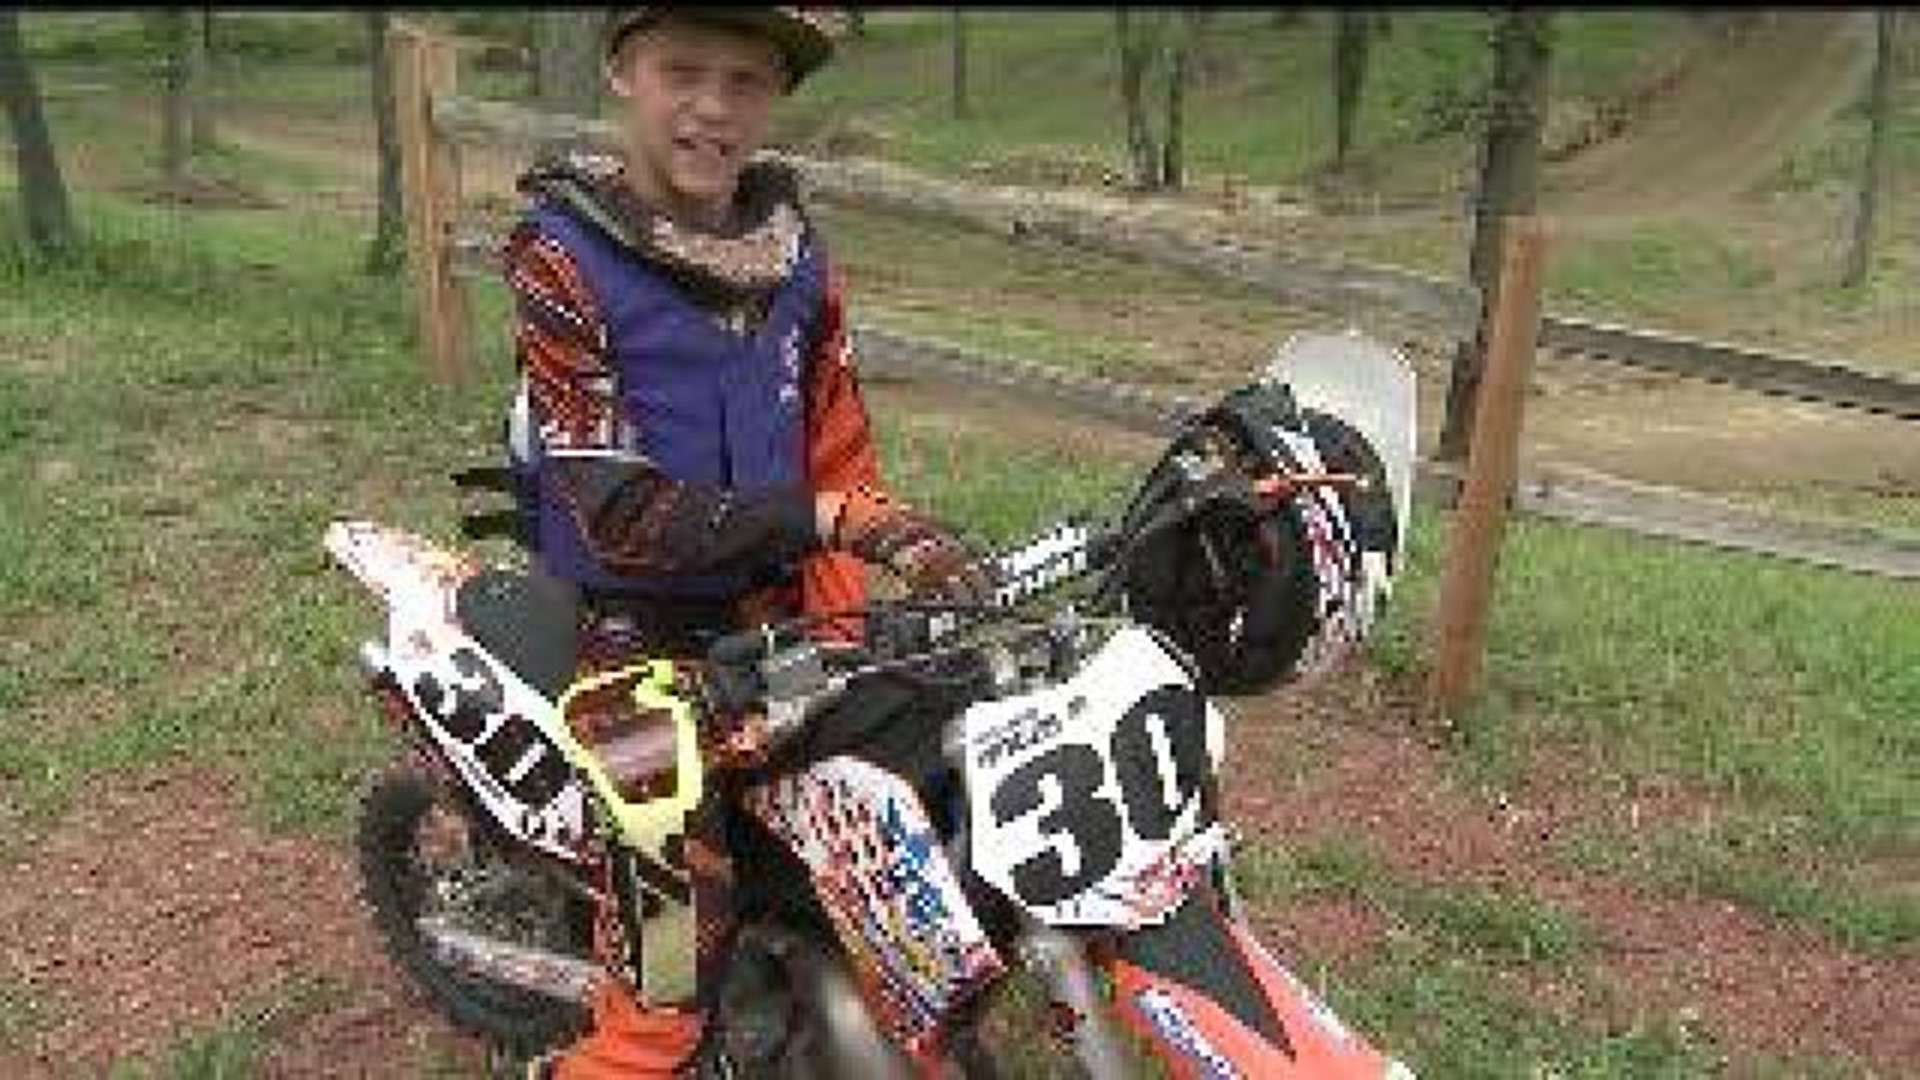 Local motocross standout to compete in Amateur National Motocross Championship